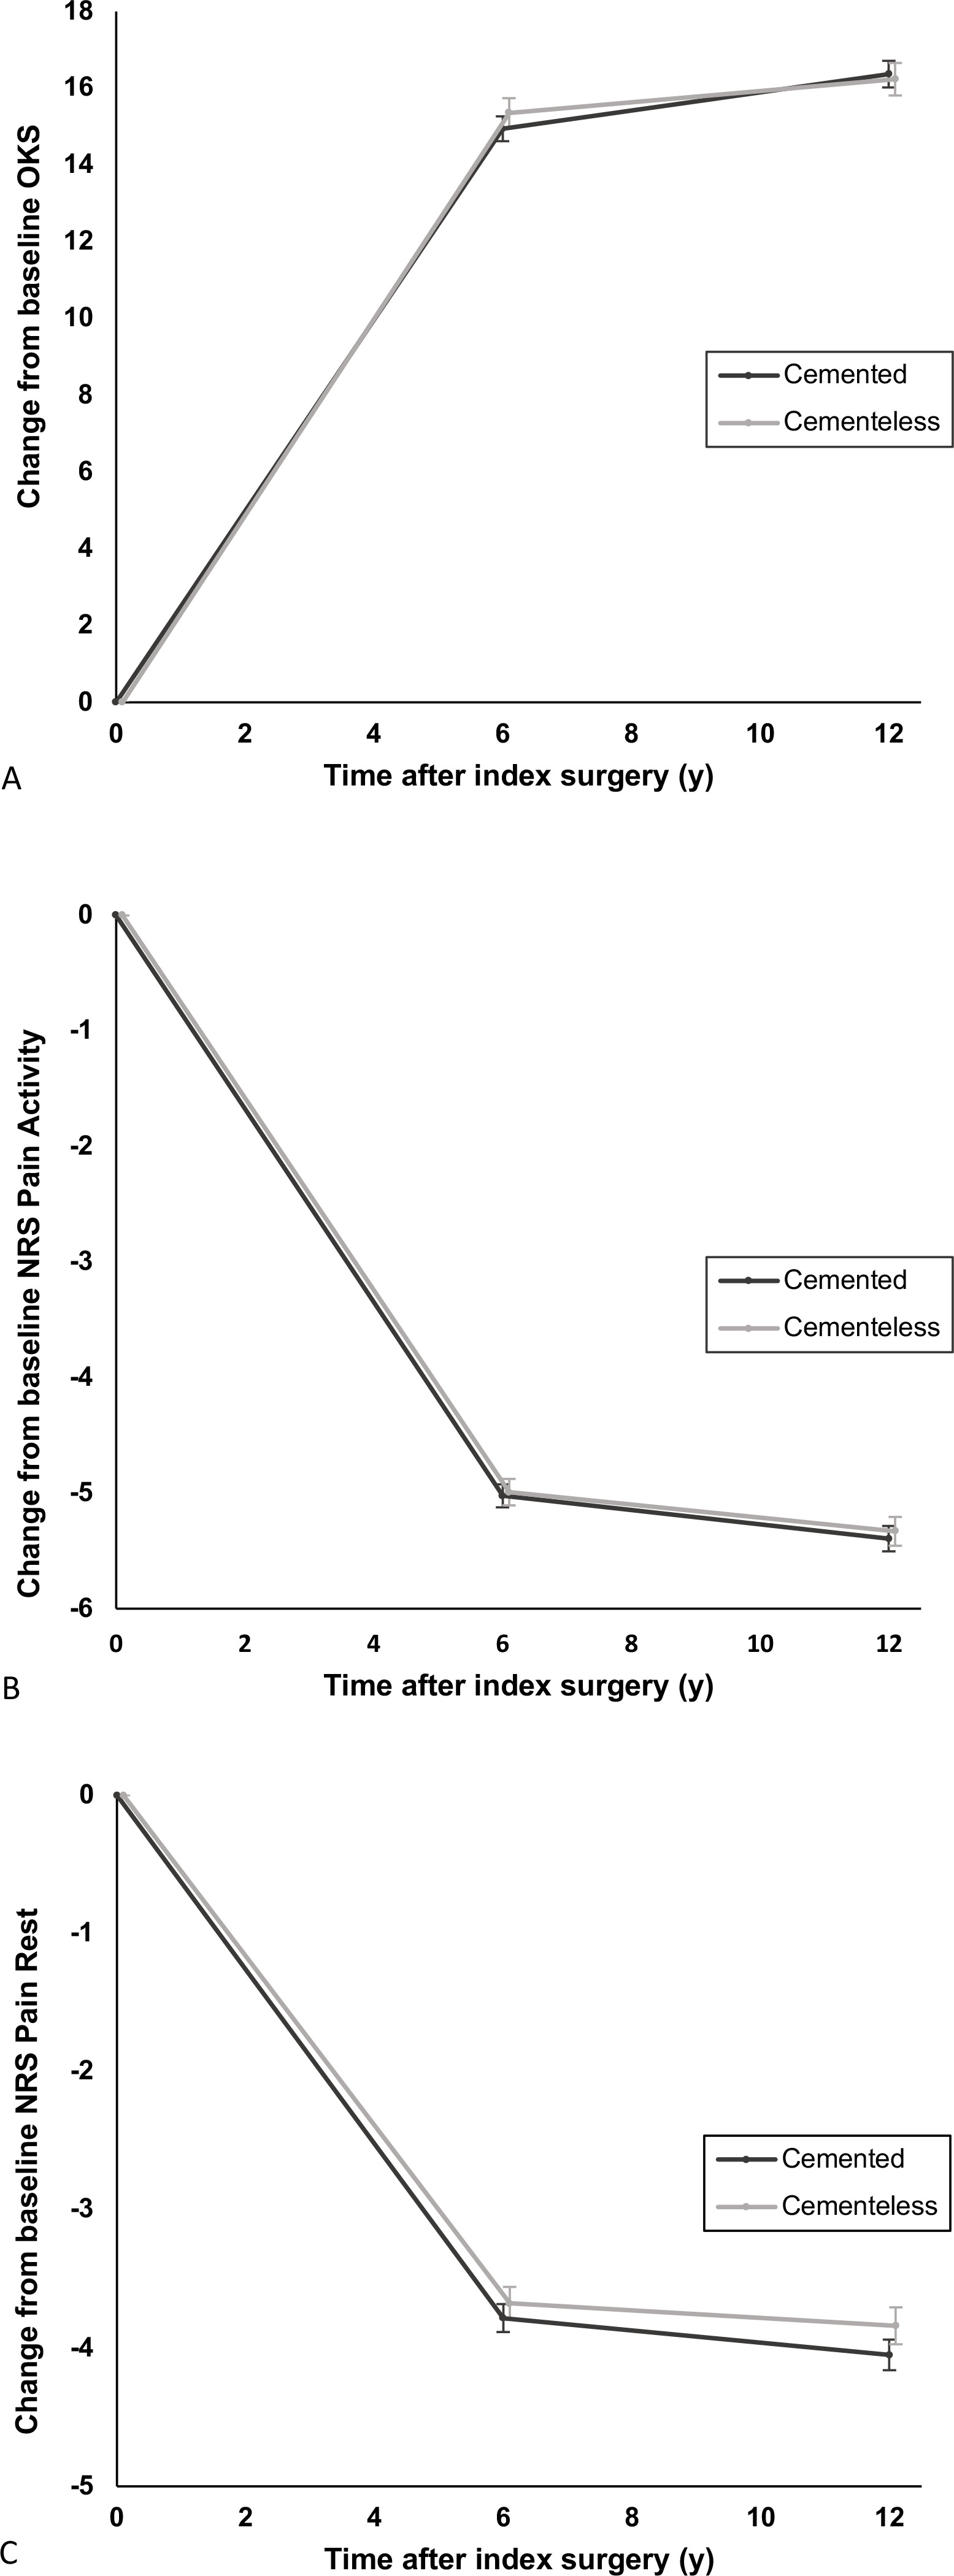 Fig. 2 
            Mean change from baseline to six- and 12-month follow-up for cementless and cemented medial unicompartmental knee arthroplasty. a) Oxford Knee Score (OKS), b) numerical rating scale (NRS) pain during activity, and c) NRS pain during rest.
          